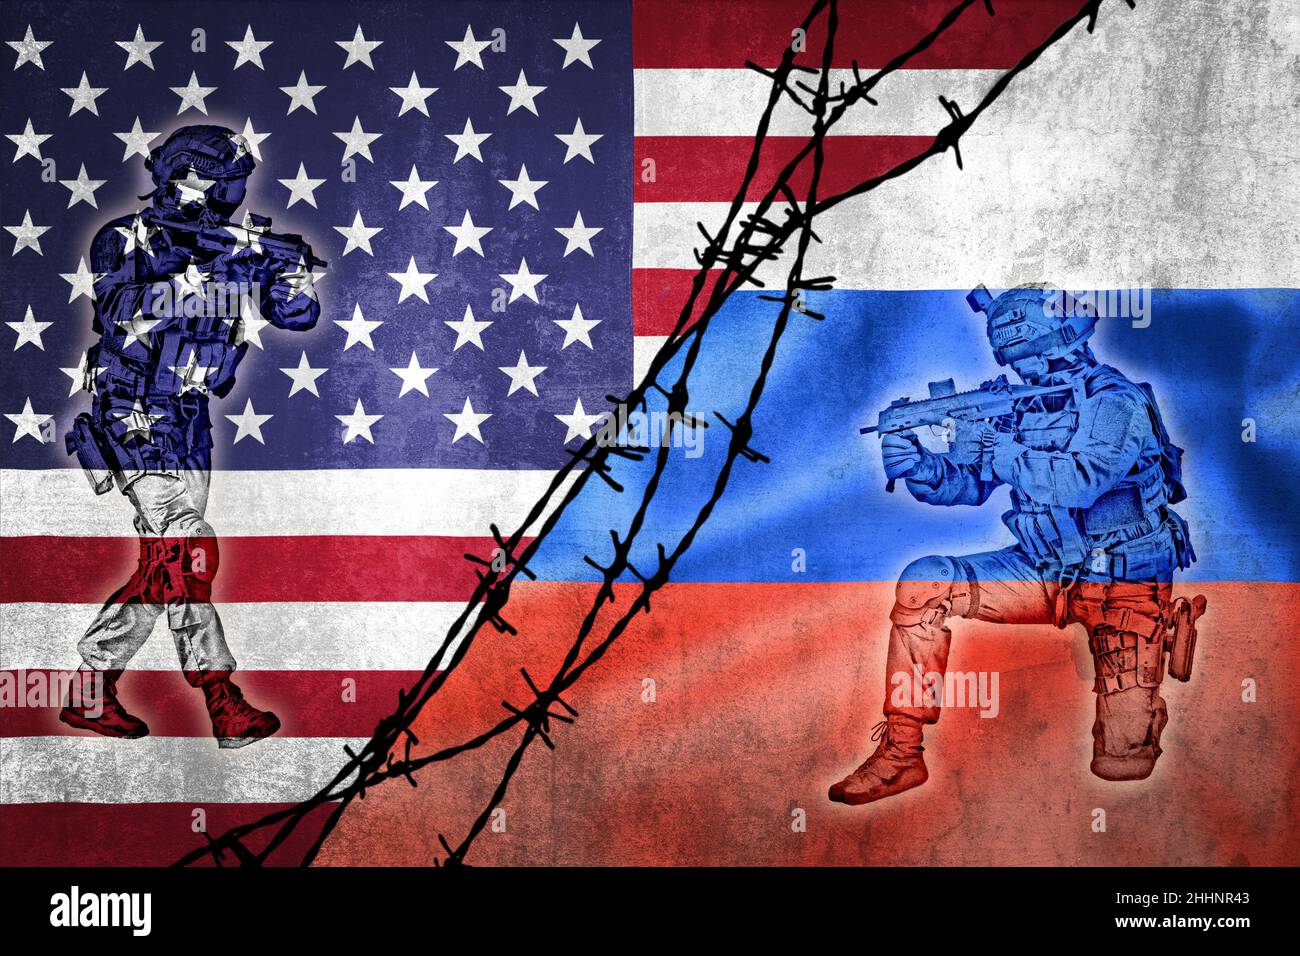 Grunge flags of Russian Federation and USA divided by barb wire with soliders pointing weapon at each other illustration, concept of tense relations b Stock Photo